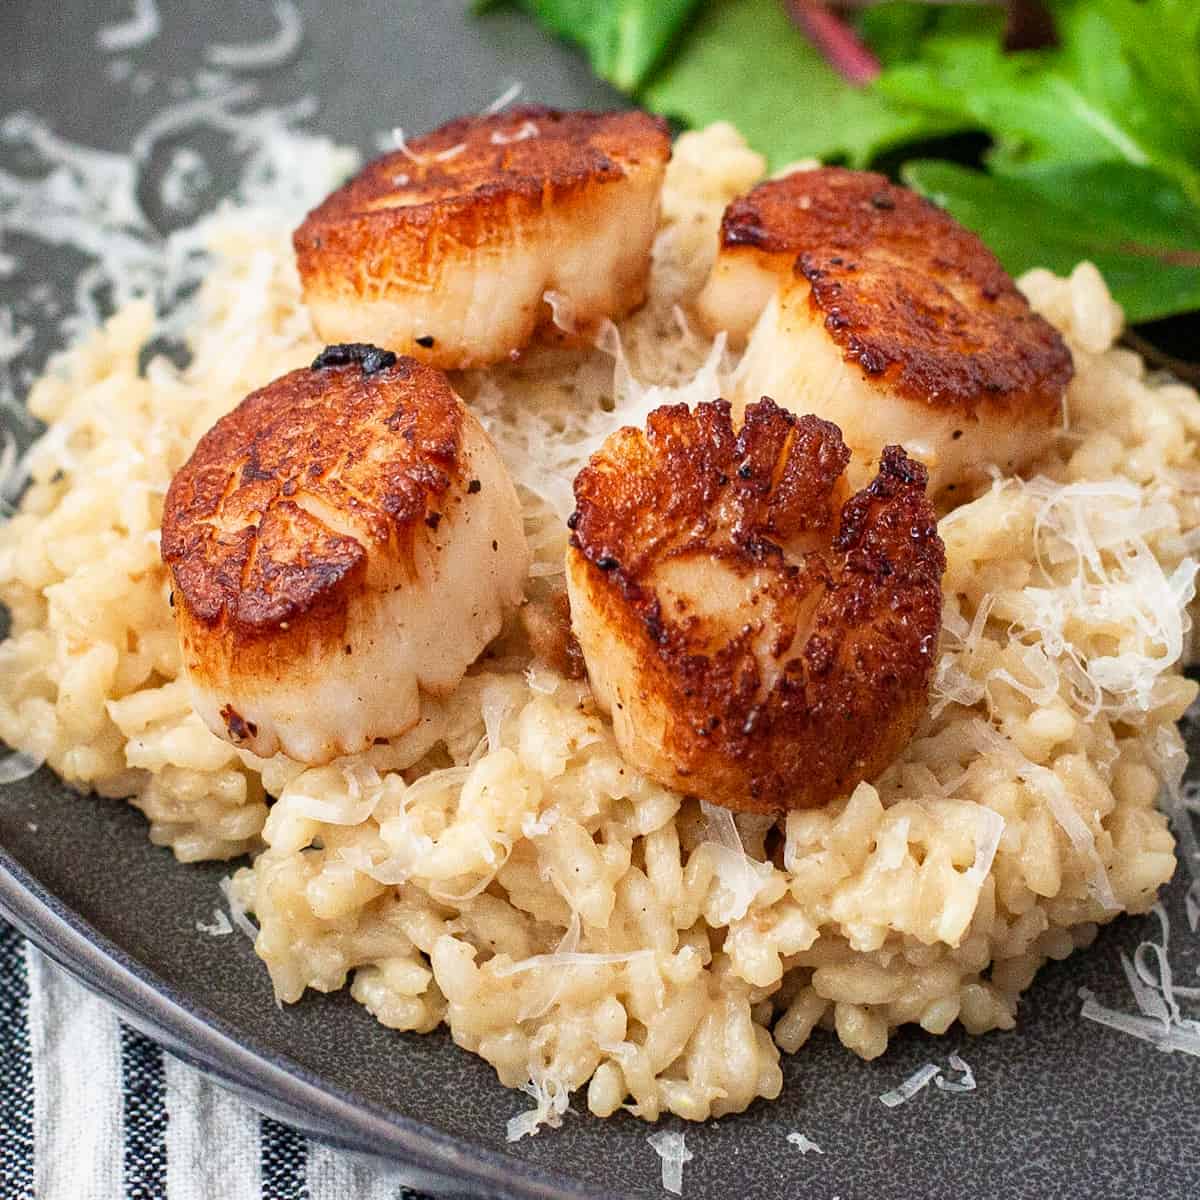 Seared scallops served over a bed of creamy Parmesan risotto.